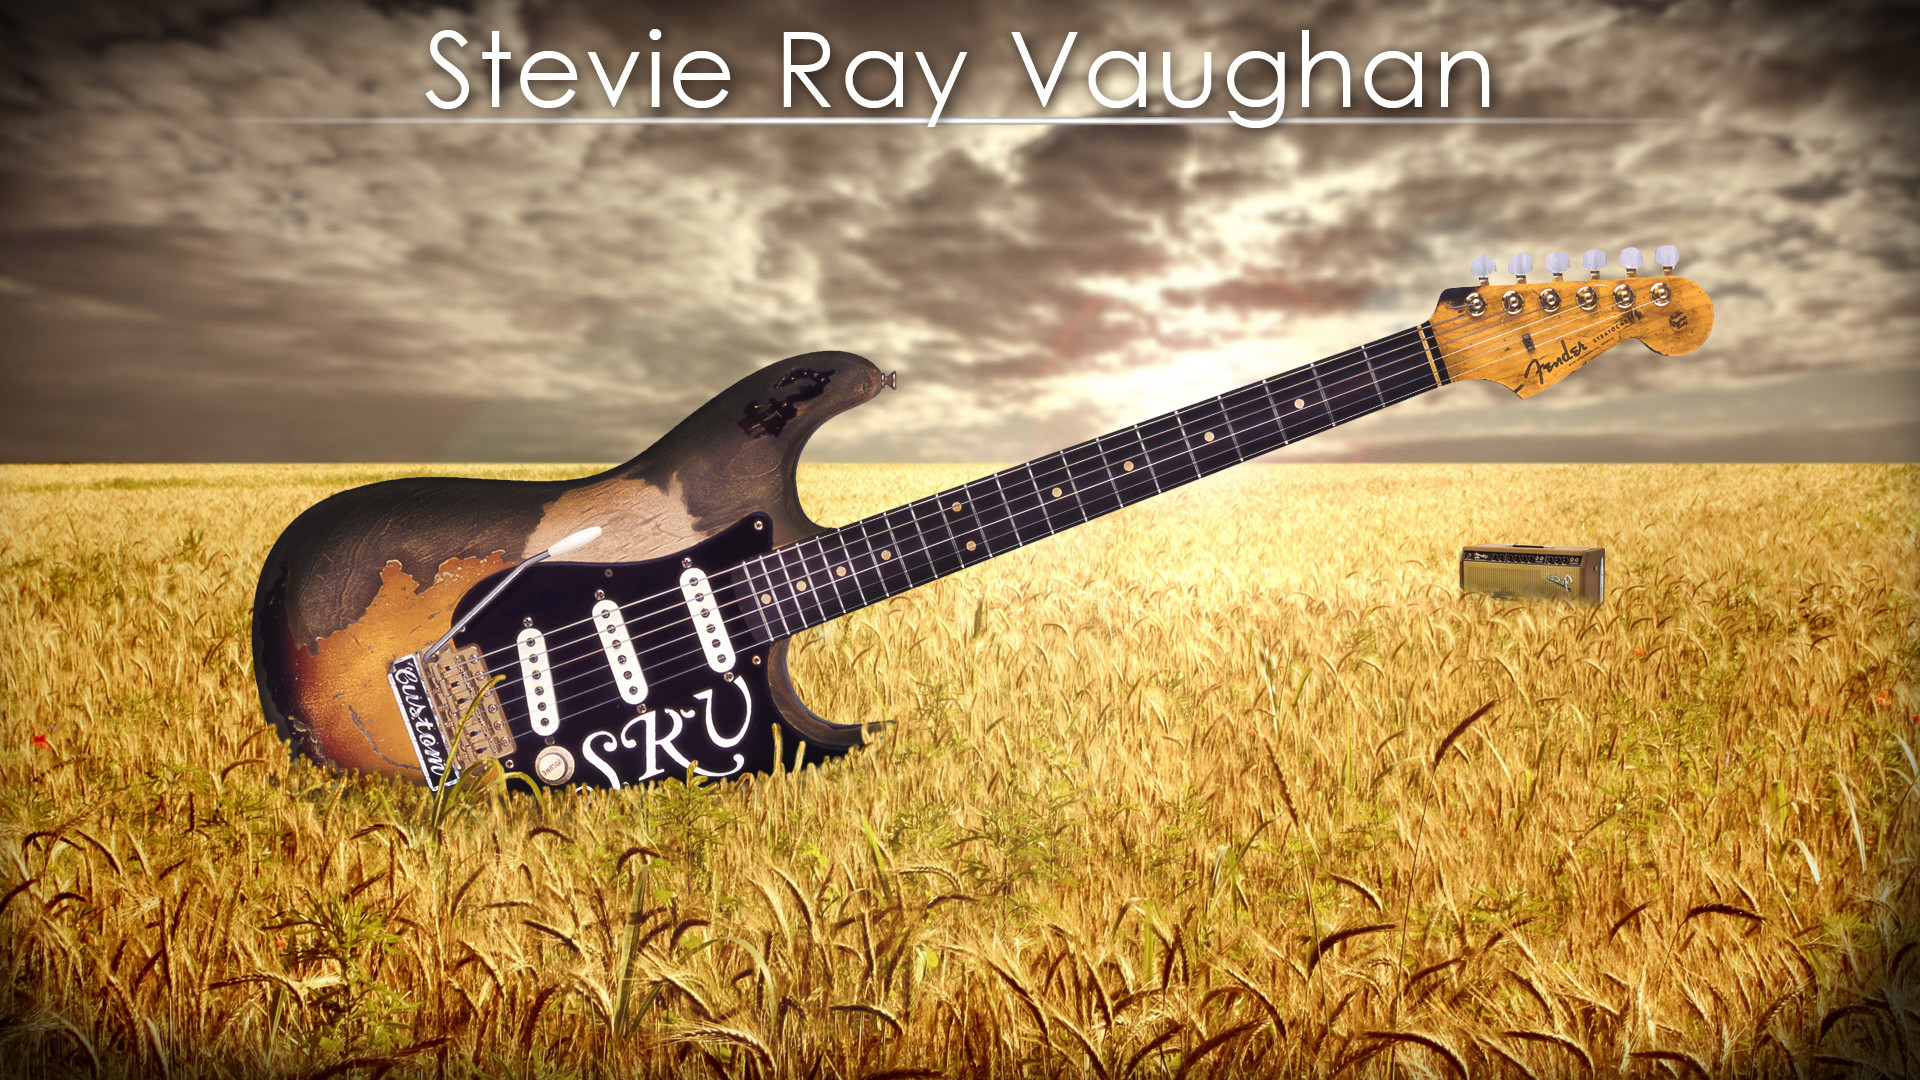 1920x1080 Number One Stevie Ray Vaughan By Feel2X On DeviantArt